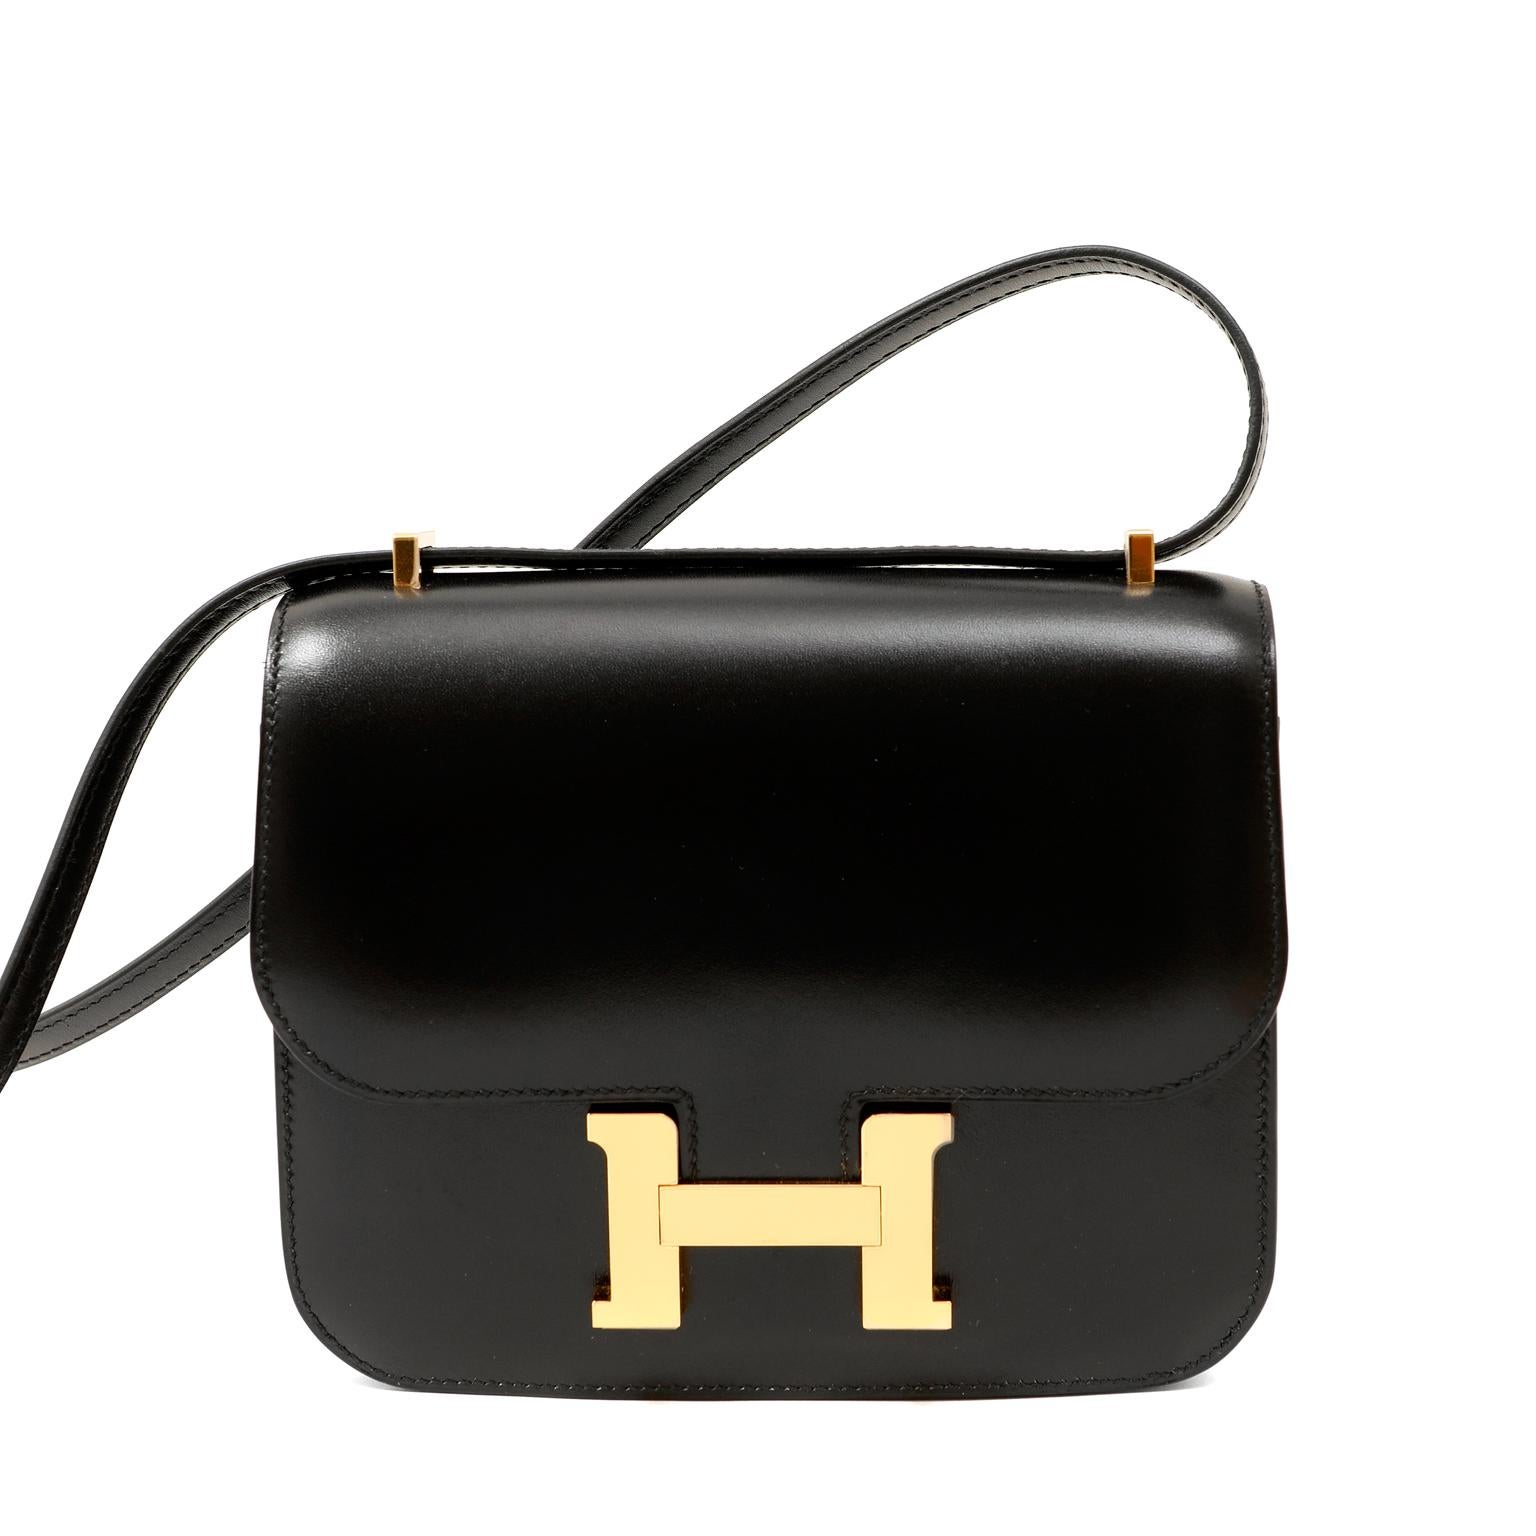 This authentic Hermès Black Box Calf Mini Constance in pristine unworn condition with the protective plastic intact on the hardware. 
The Constance has simple clean lines and combines classic with modern.  The adjustable strap allows for shoulder or